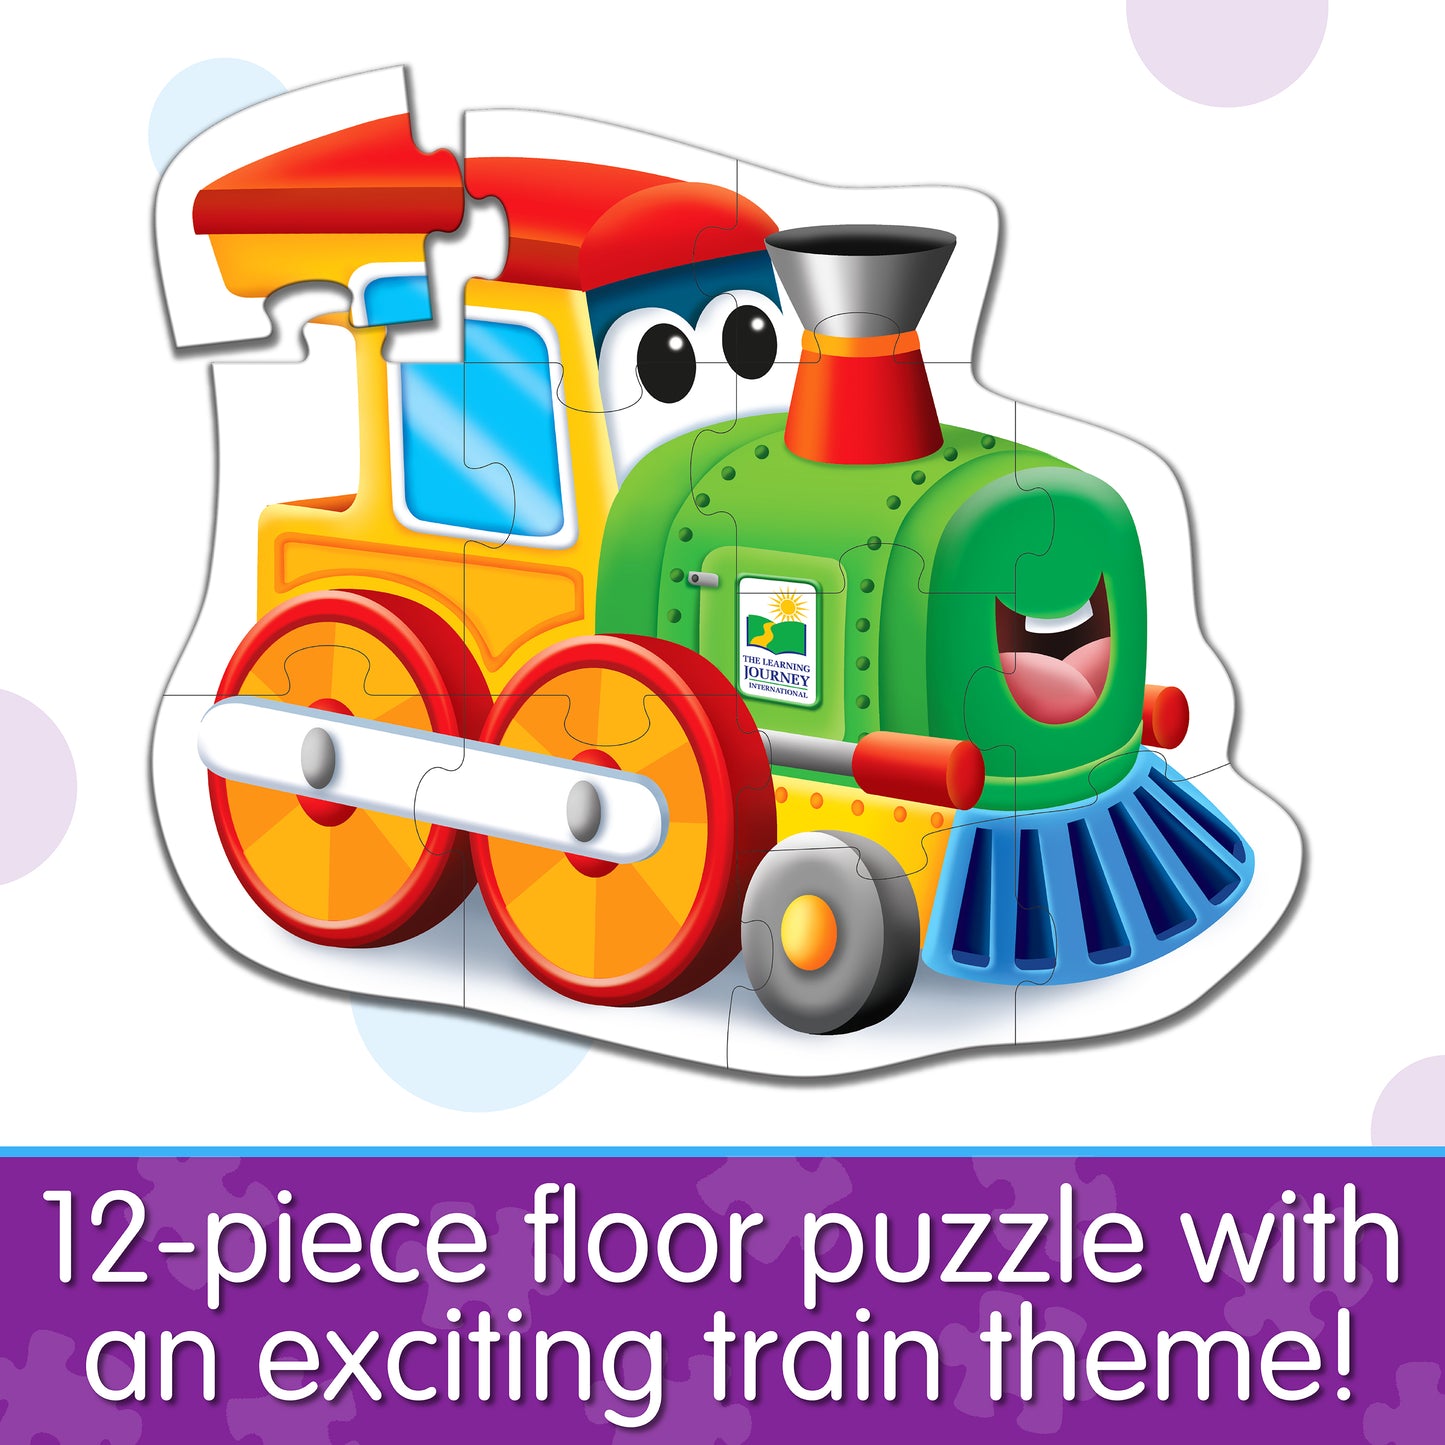 Infographic about My First Big Puzzle - Train that says, "12-piece floor puzzle with an exciting train theme!"